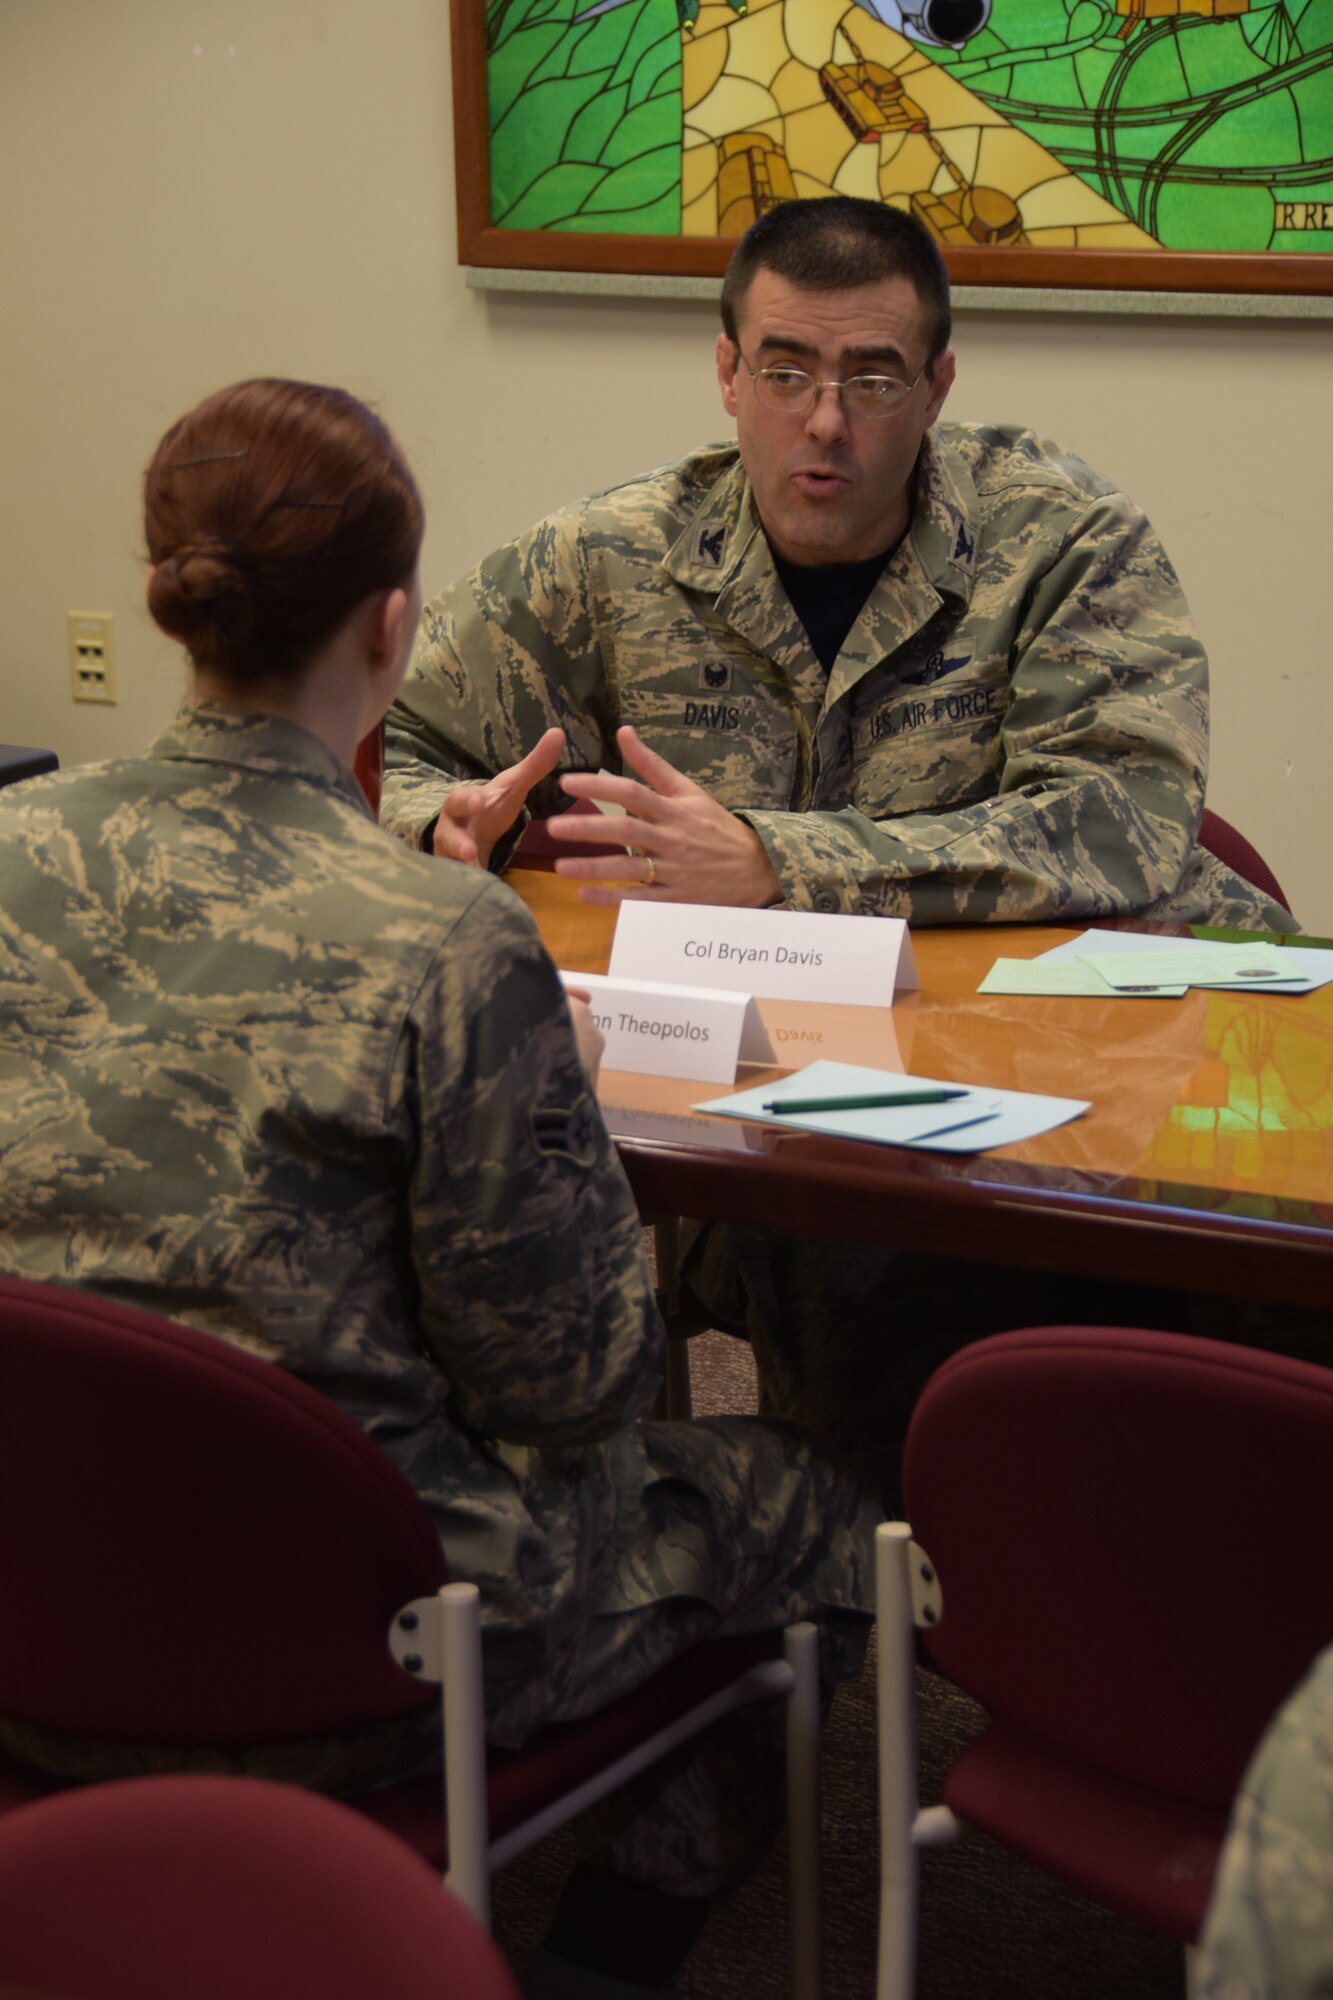 178th Wing Commander Col. Bryan Davis mentors Airman 1st Class Kathrynn Theopolos from the178th Medical Group at the Springfield Air National Guard Base March 6, 2016. They participated in a wing-wide speed mentoring session where Airmen rotated stations every few minutes to receive mentoring from different base leaders . (Ohio Air National Guard photo by Master Sgt. Seth Skidmore)